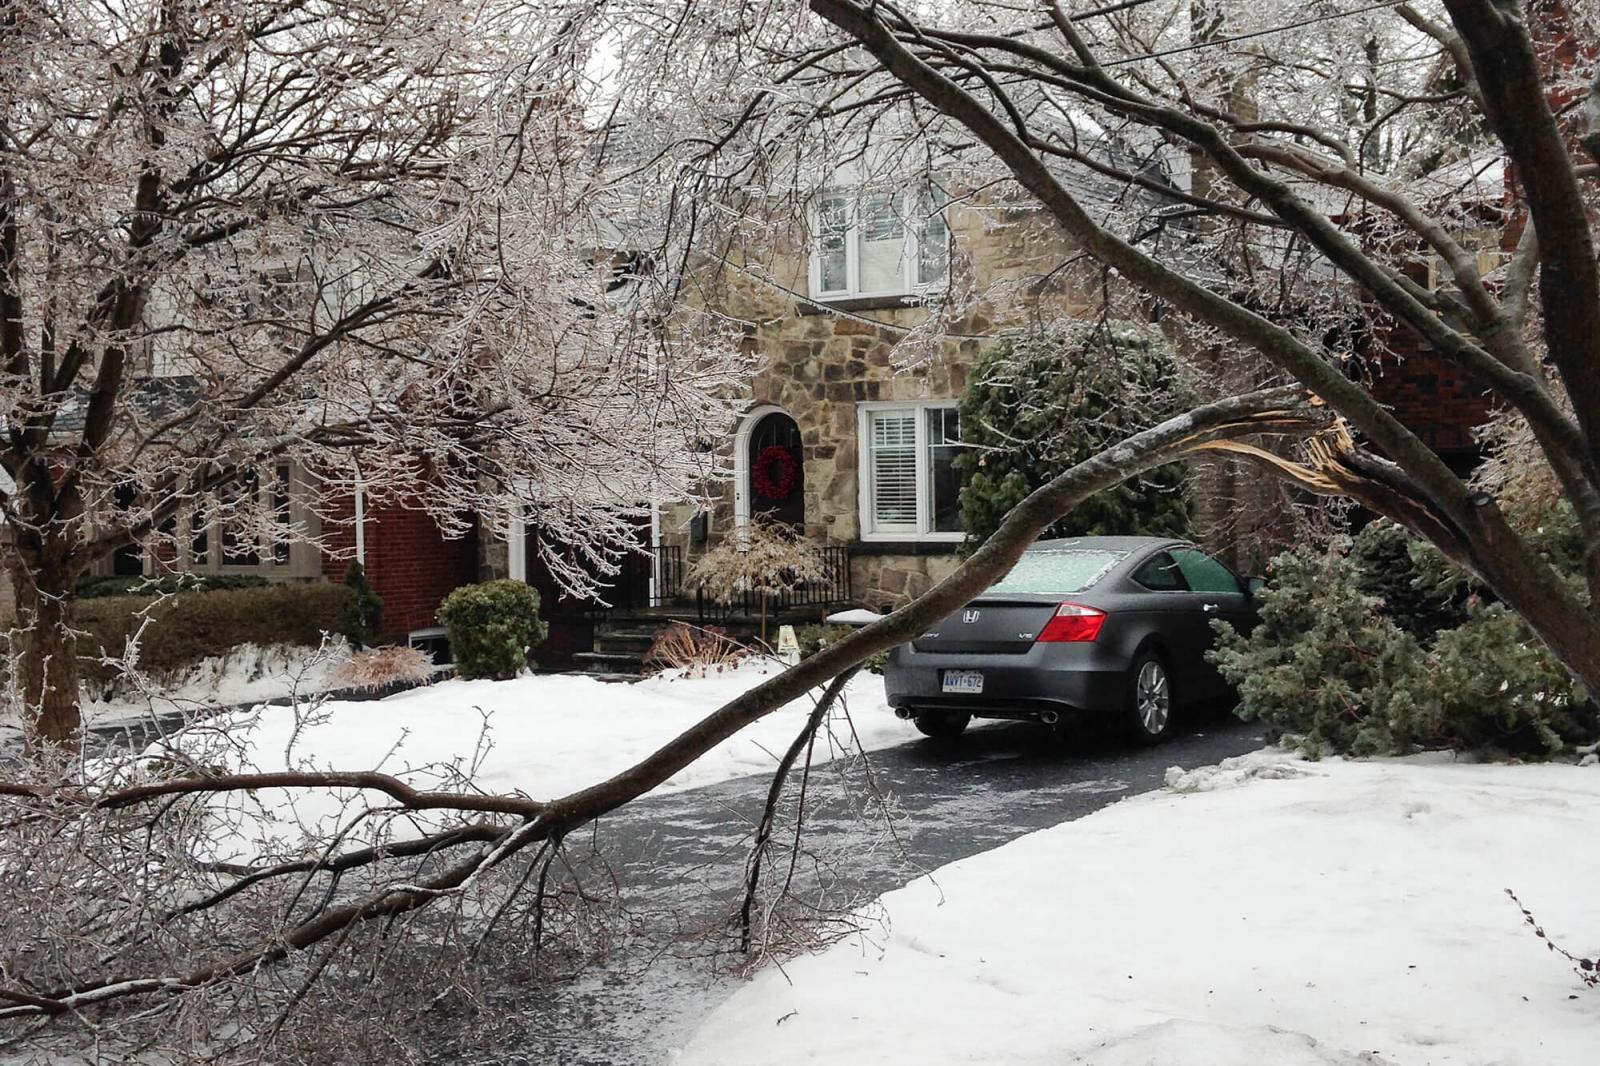 The December 2013 ice storm may draw attention to the benefits of the proper care and pruning of urban trees.